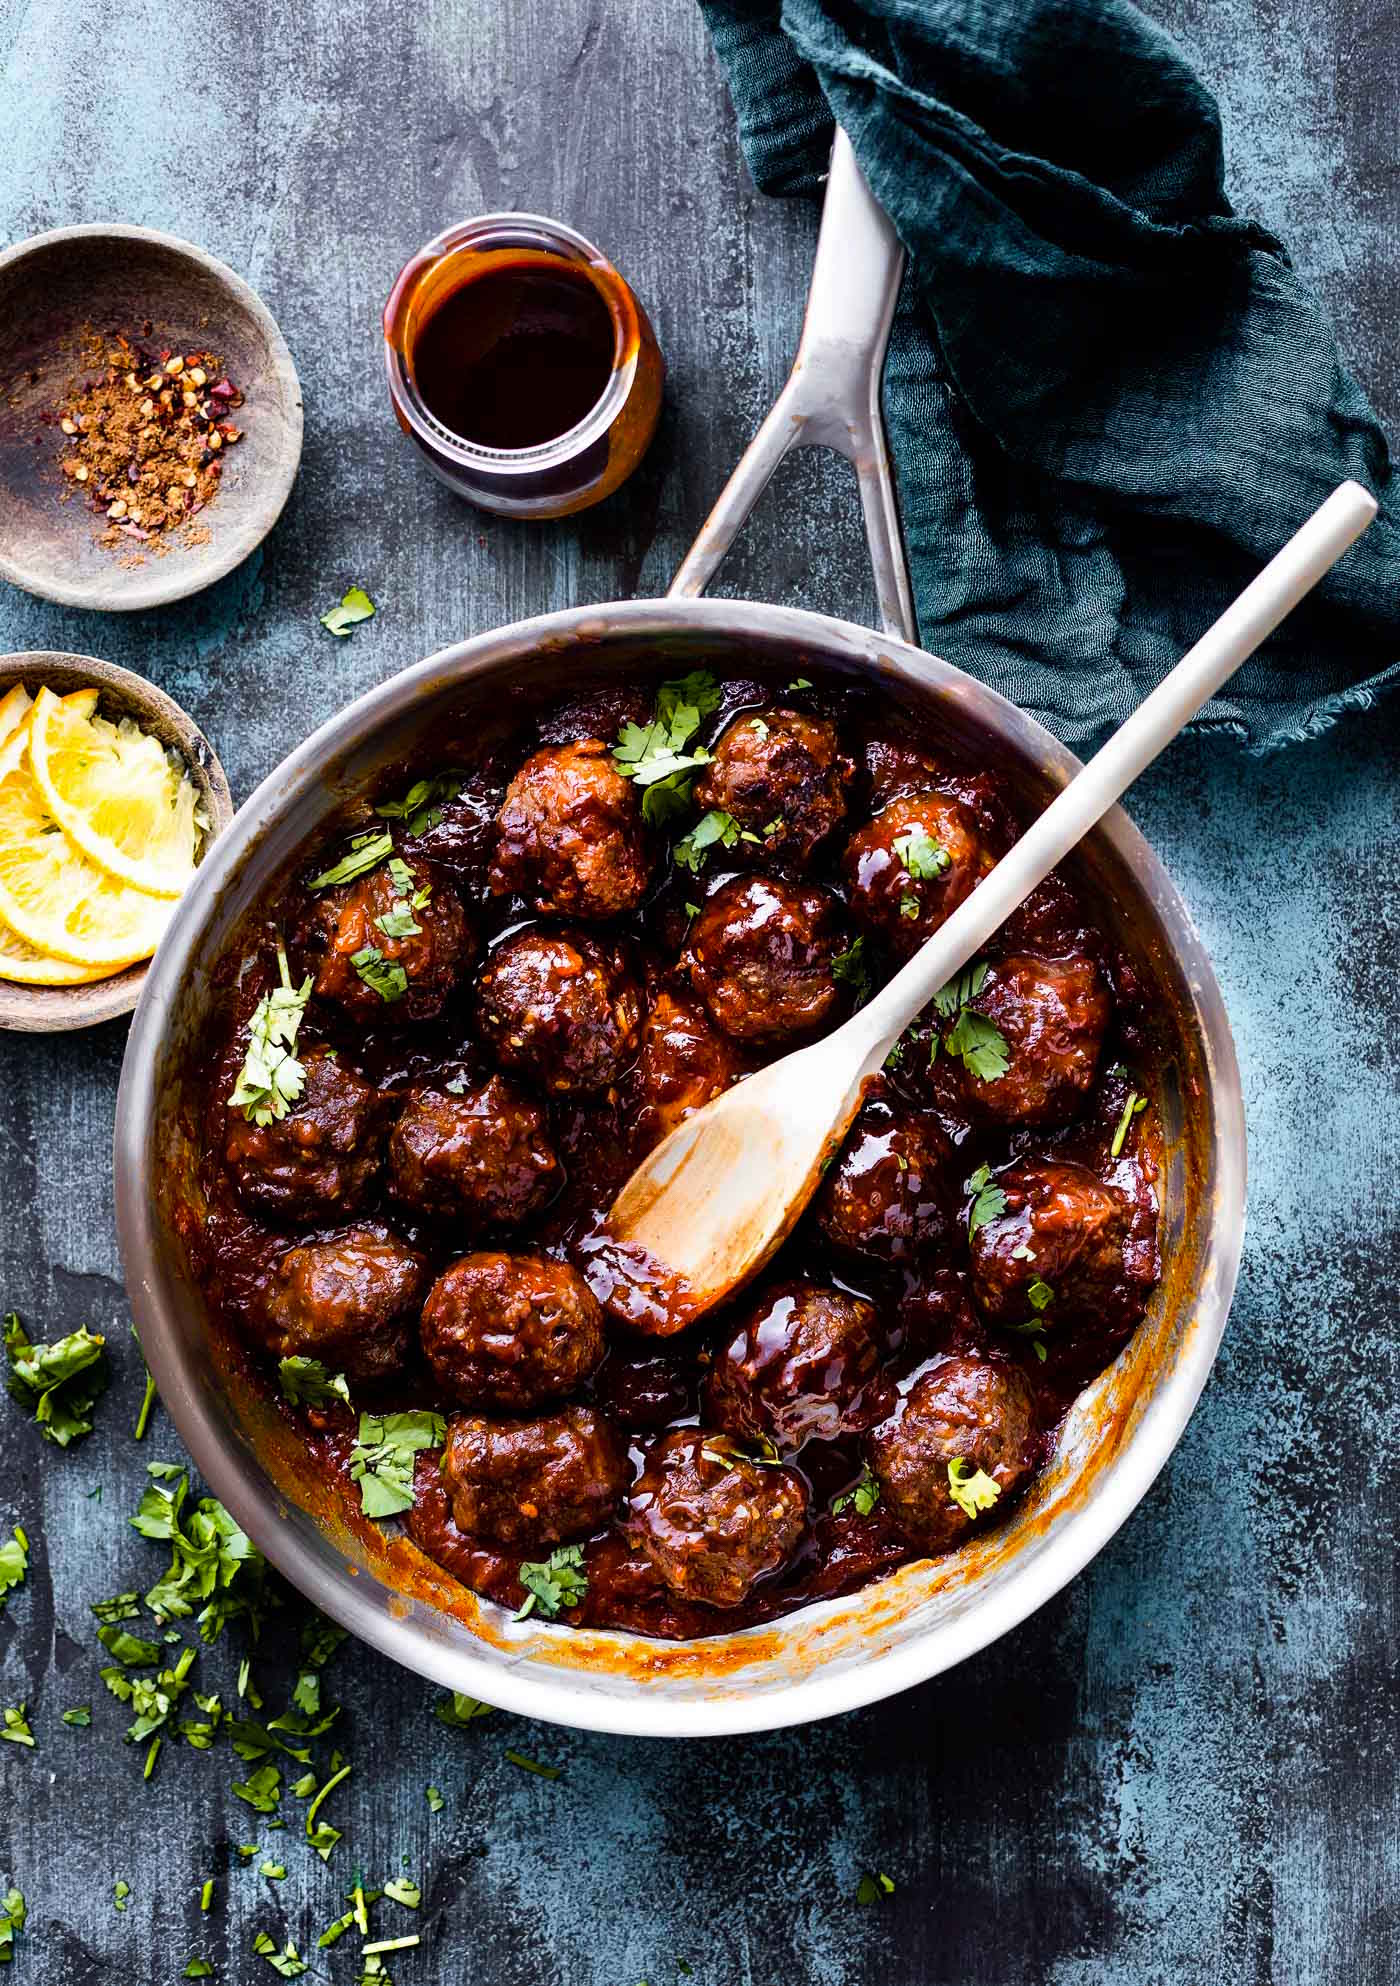 Paleo friendly 5 Spice BBQ Meatballs with a zesty Orange Hoisin sauce! These Asian Style BBQ meatballs are quick to prep and cooked in just 30 minutes. Natural ingredients with no refined sugar options, and packed with lean protein. Serve as an appetizer, meal, or a healthy protein for easy meal prep planning. Freezer friendly ya’ll! #glutenfree #healthy #paleo #meatballs